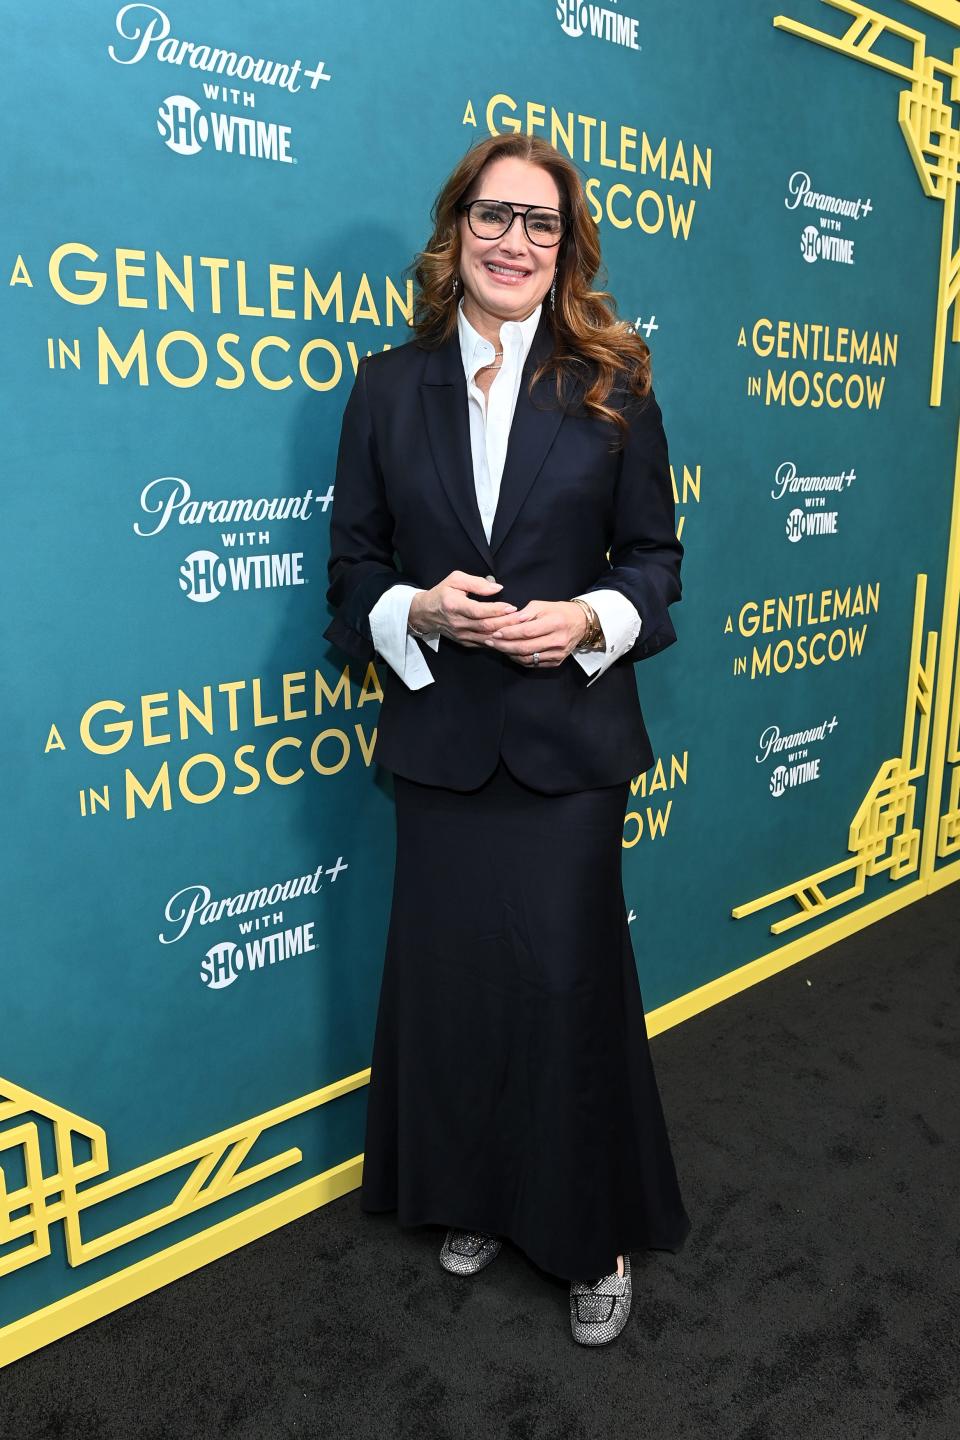 NEW YORK, NEW YORK - MARCH 12: Brooke Shields attends "A Gentleman in Moscow" premiere event in NYC at Museum of Modern Art on March 12, 2024 in New York City. (Photo by Roy Rochlin/Getty Images for Paramount+ with SHOWTIME) ORG XMIT: 776113566 ORIG FILE ID: 2079428850